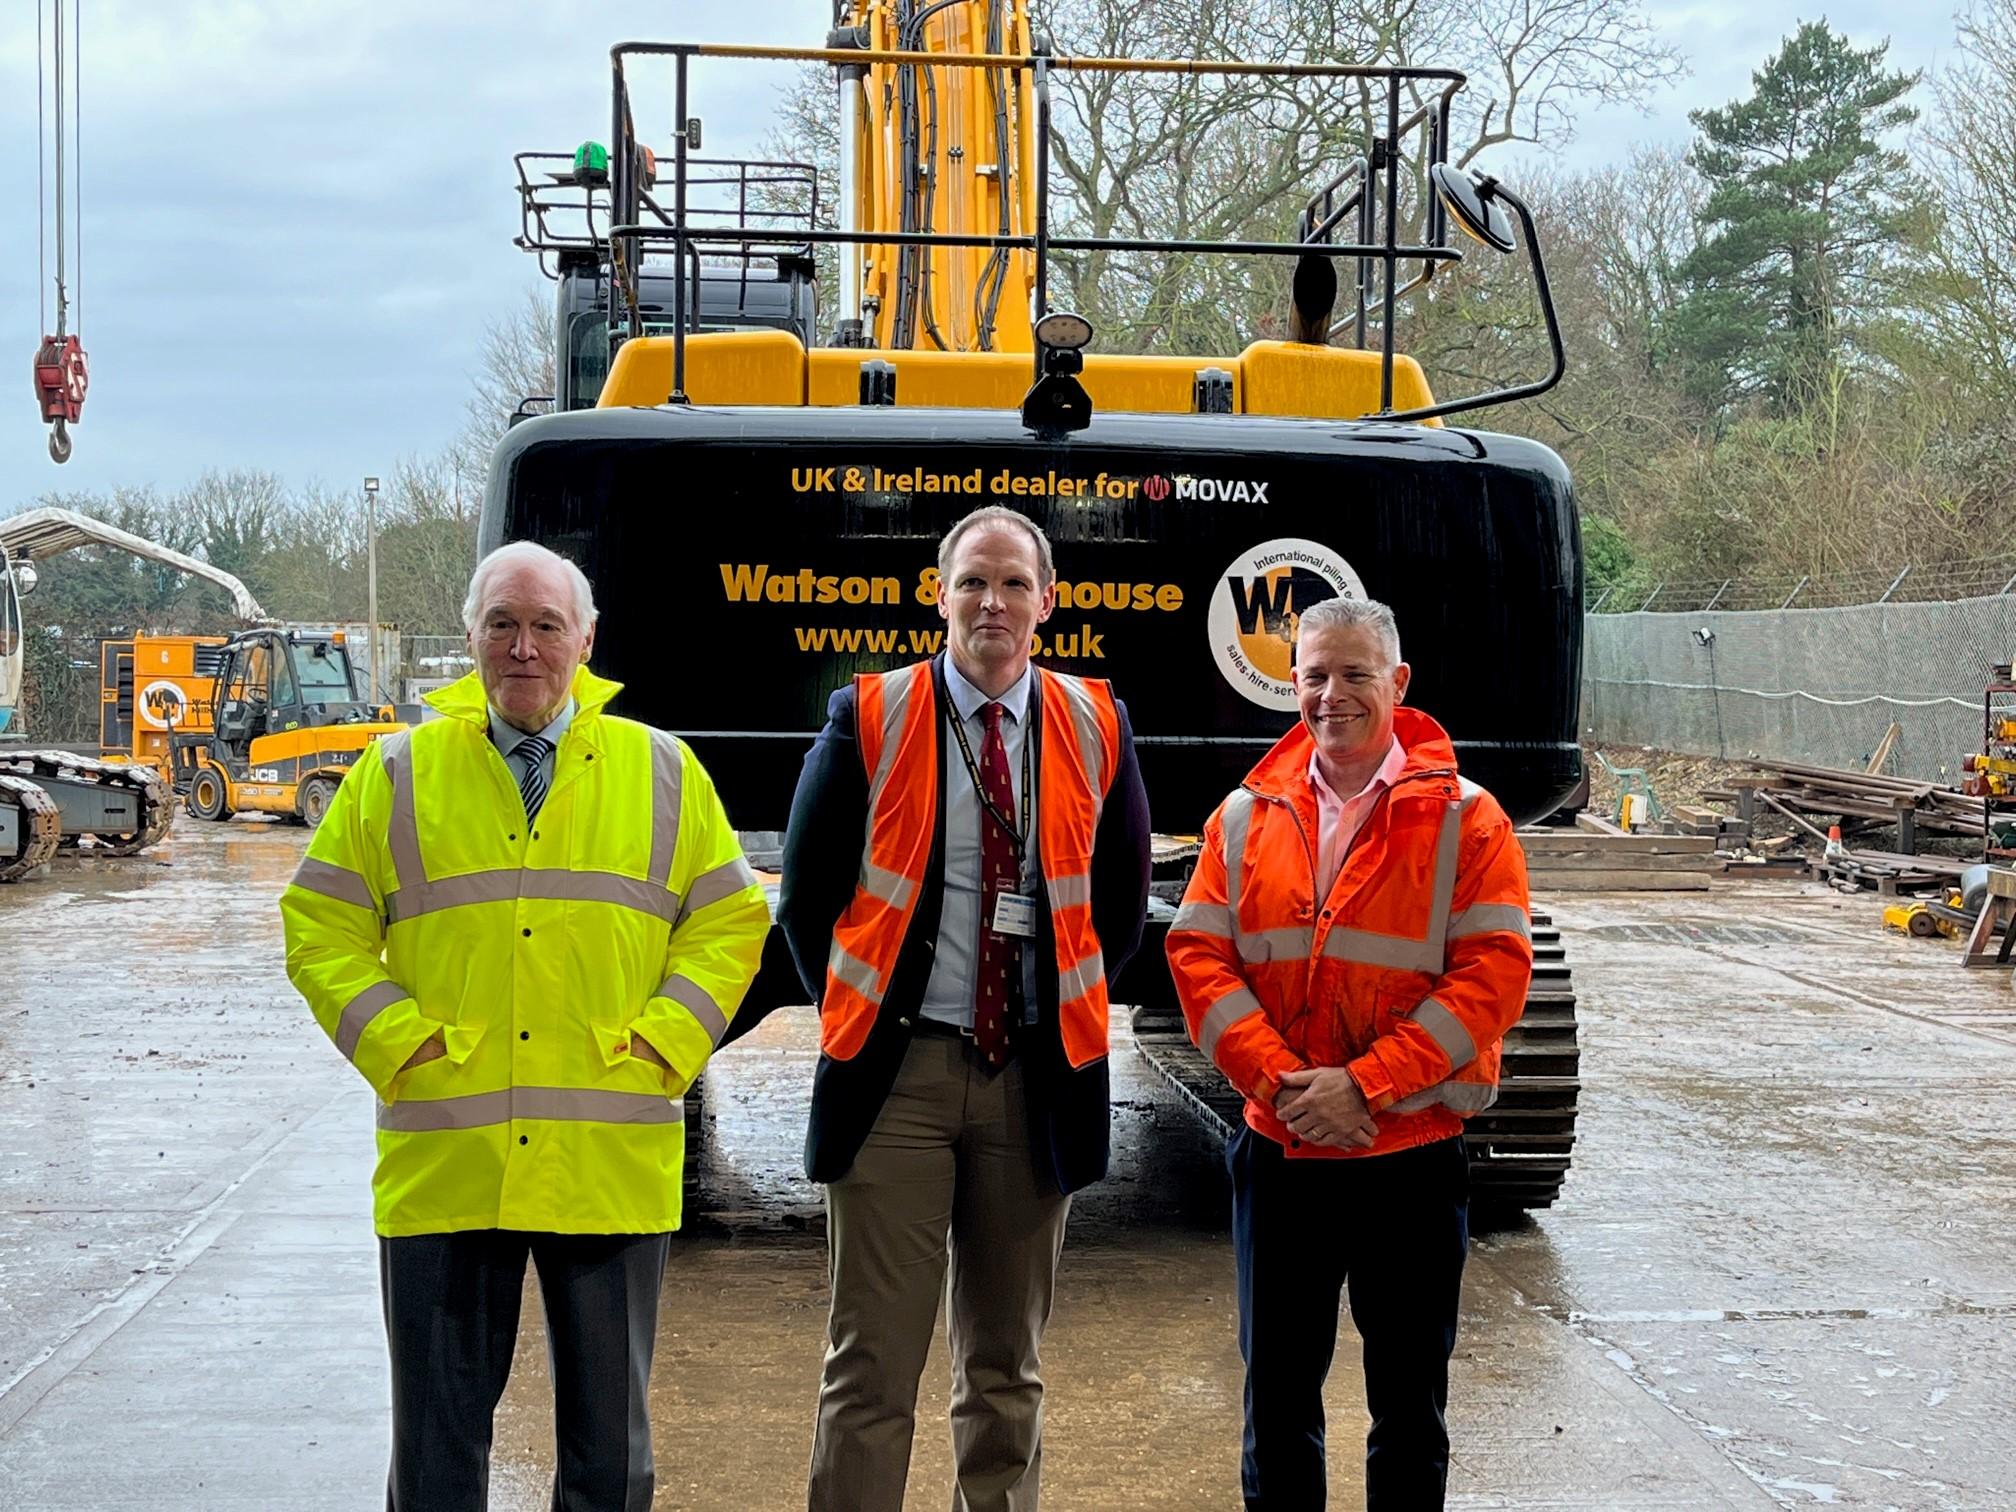 Mr Robin Watson (CEO and Founder), MP Daniel Poulter and Phillip Bell (Managing Director) standing in front of an excavator